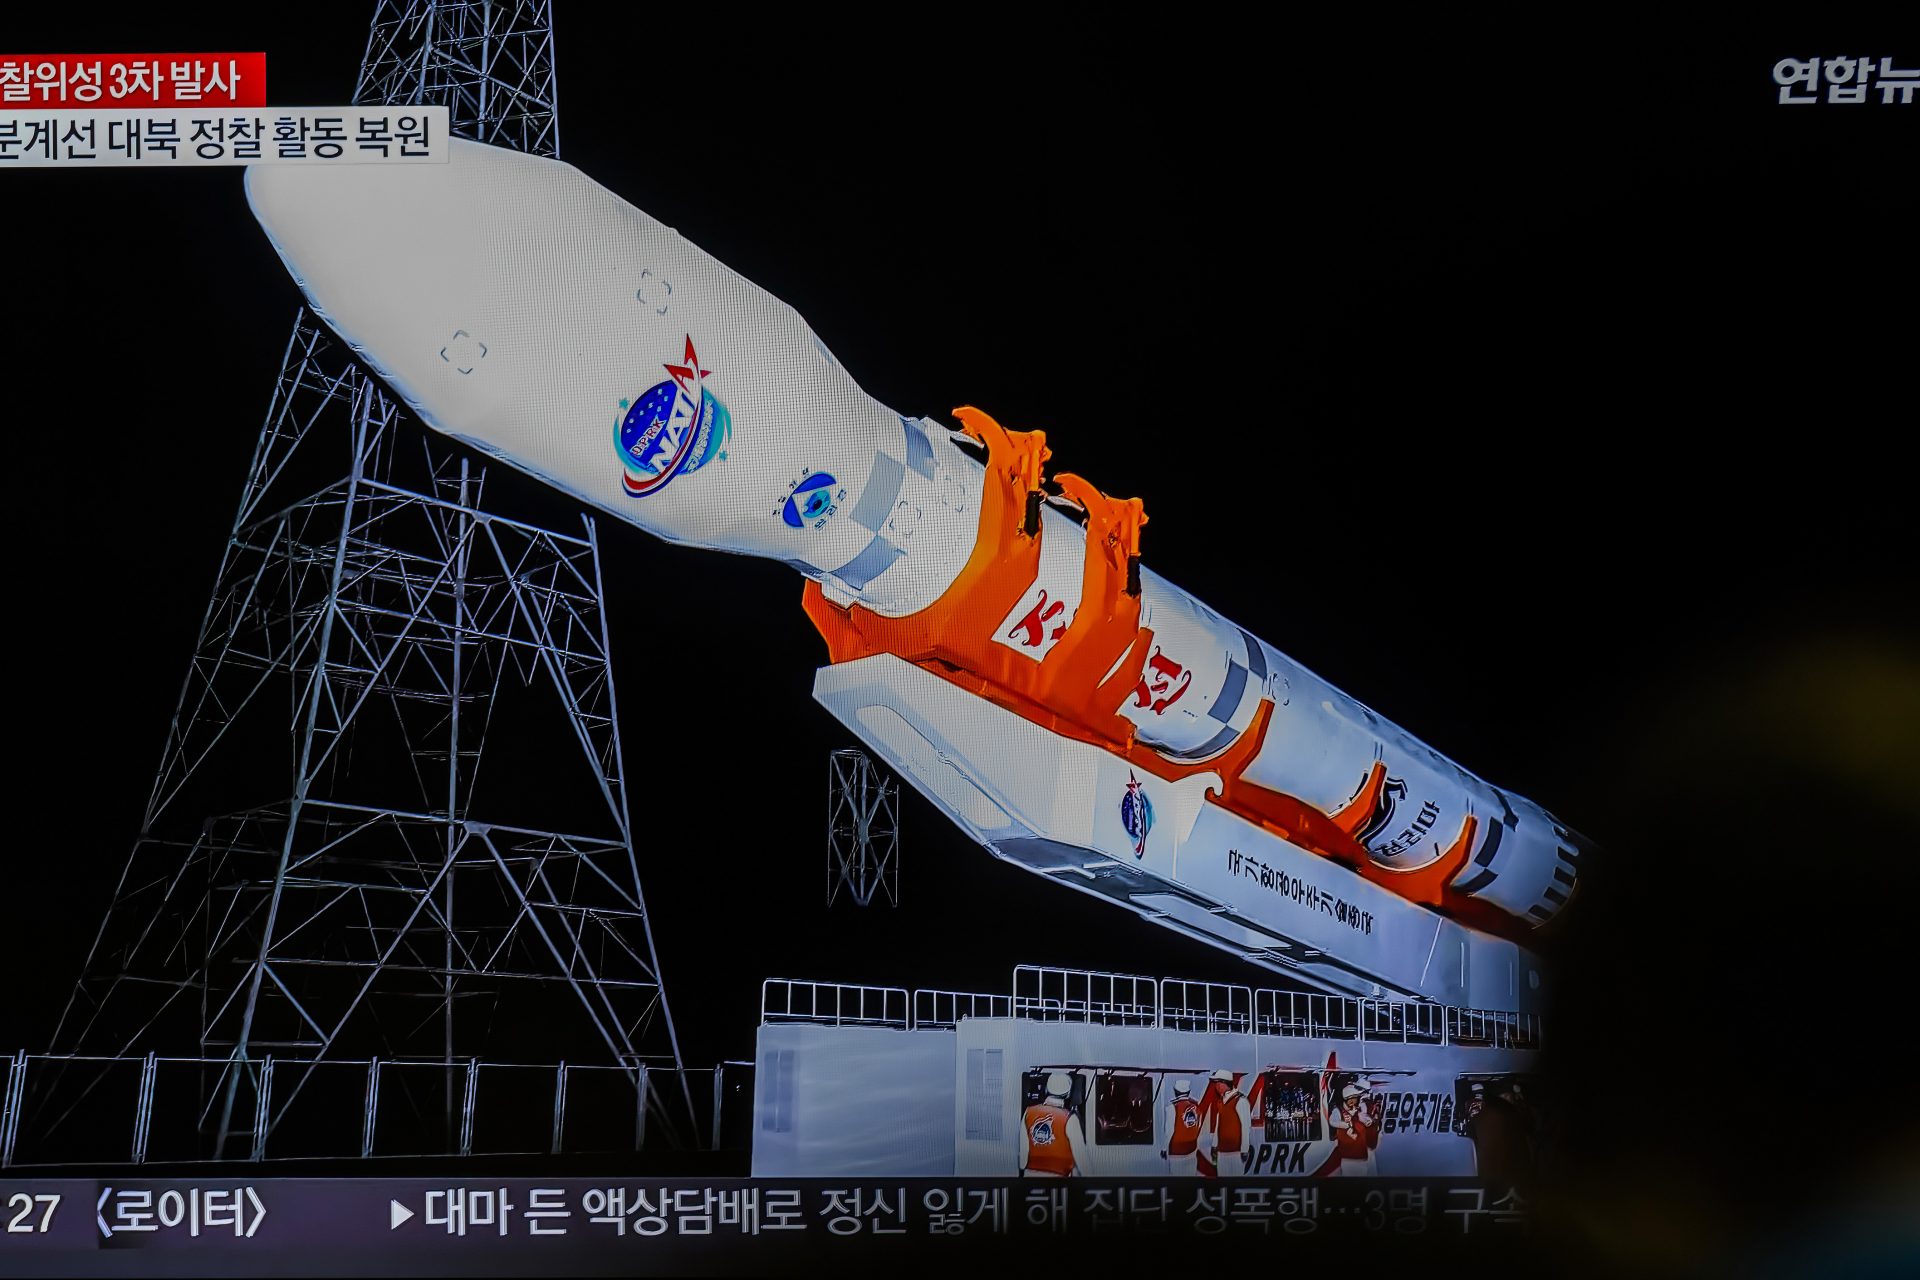 North Korea just launched a new spy satellite into space